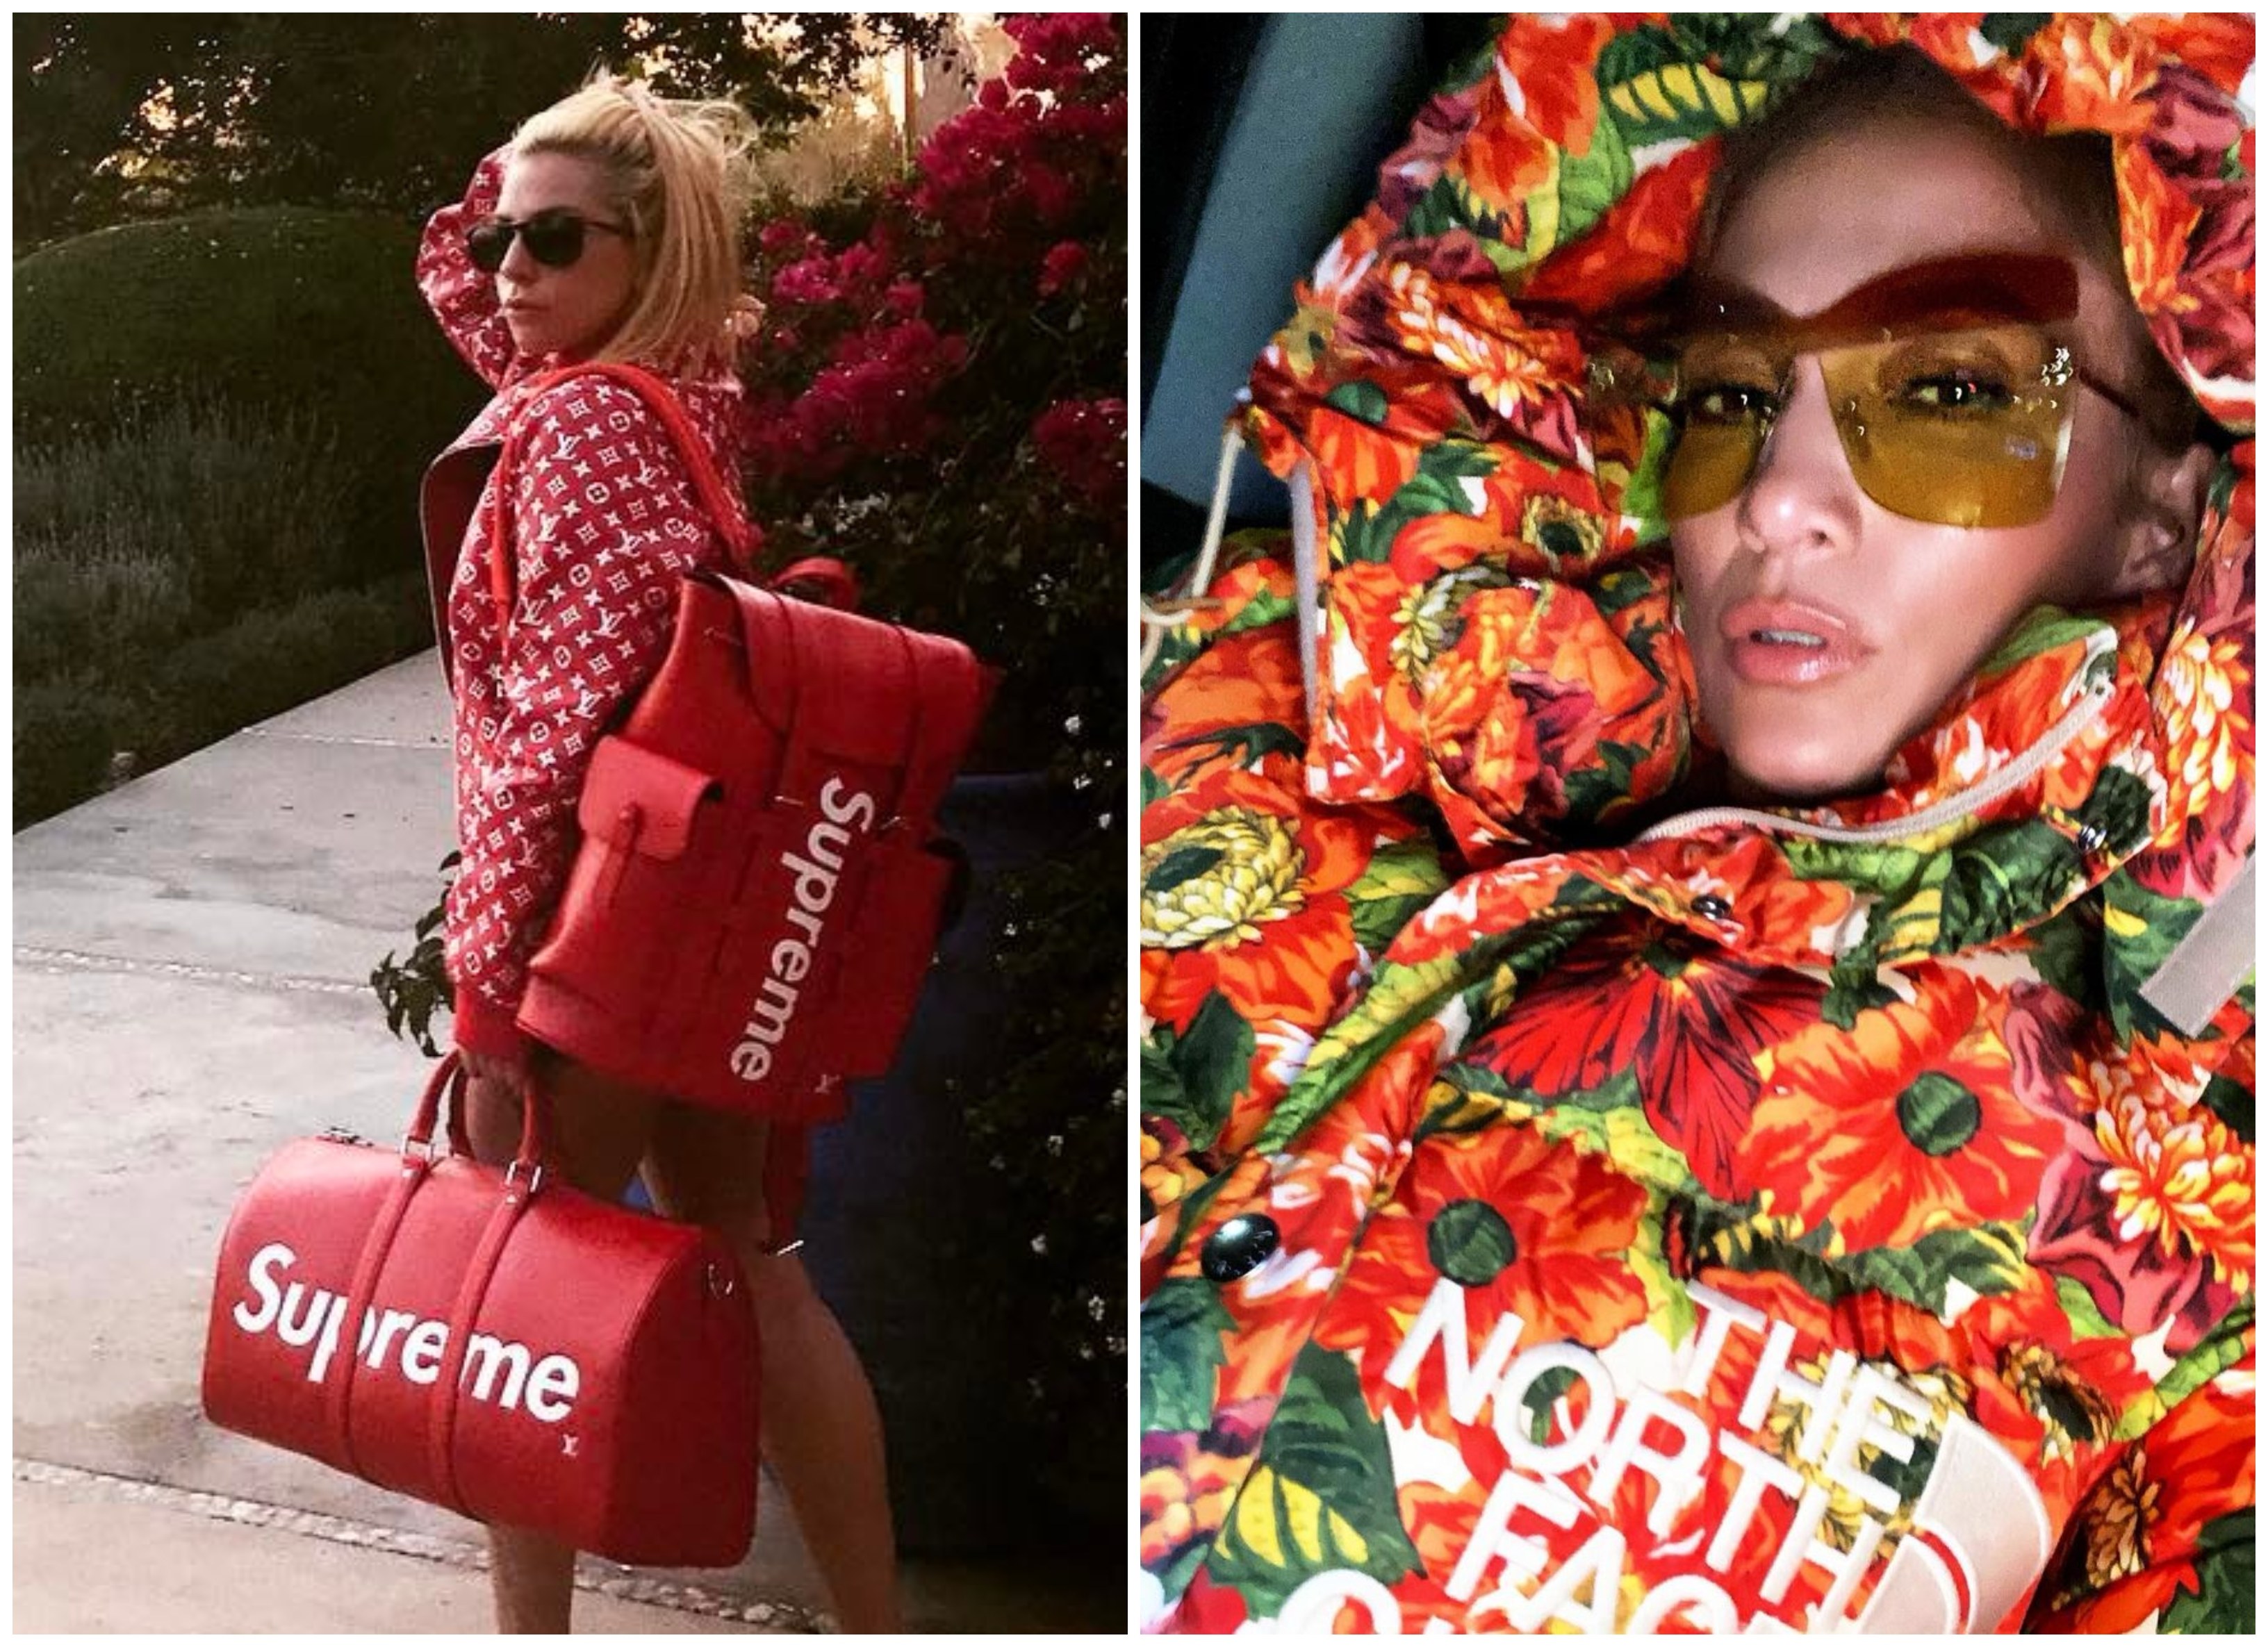 Lady Gaga and Jennifer Lopez sporting their favourite fashion collaborations, including LV x Supreme and Gucci x North Face Photos: @ladygaga, @jlo/Instagram